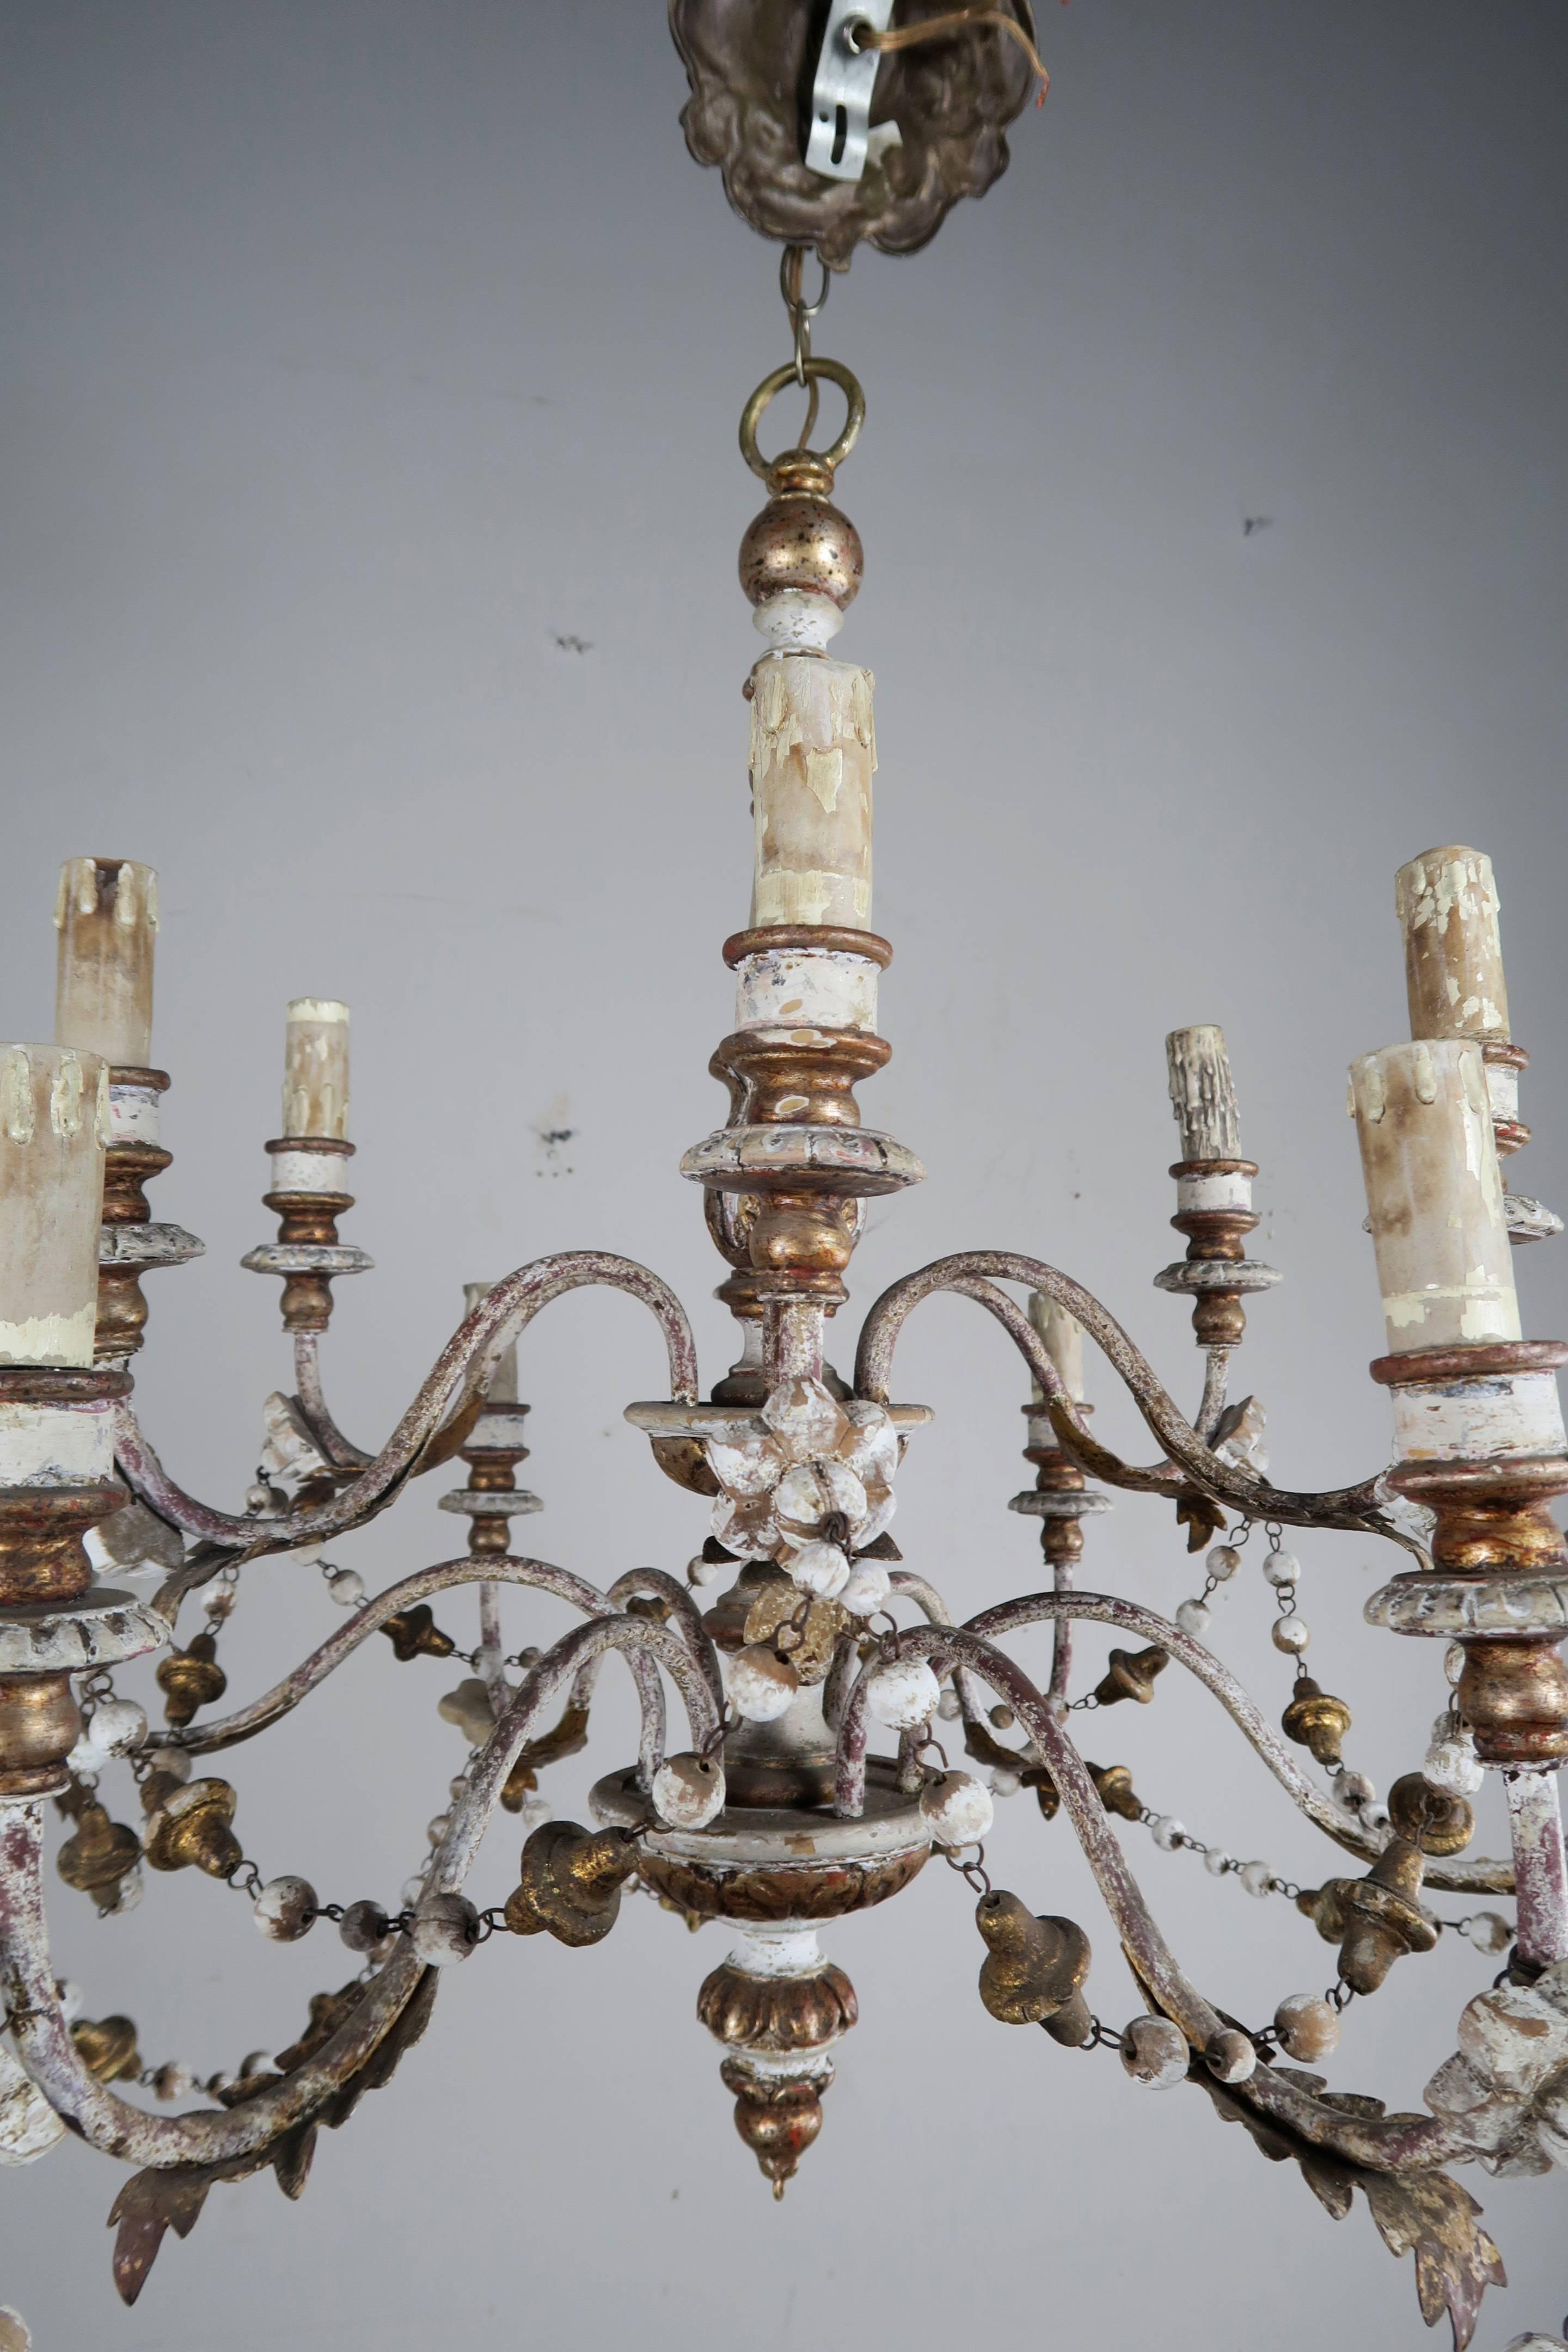 Twelve-light wood beaded white painted and parcel-gilt chandelier. The fixture is adorned with garlands of wood beads. The fixture is in working condition and ready to install.